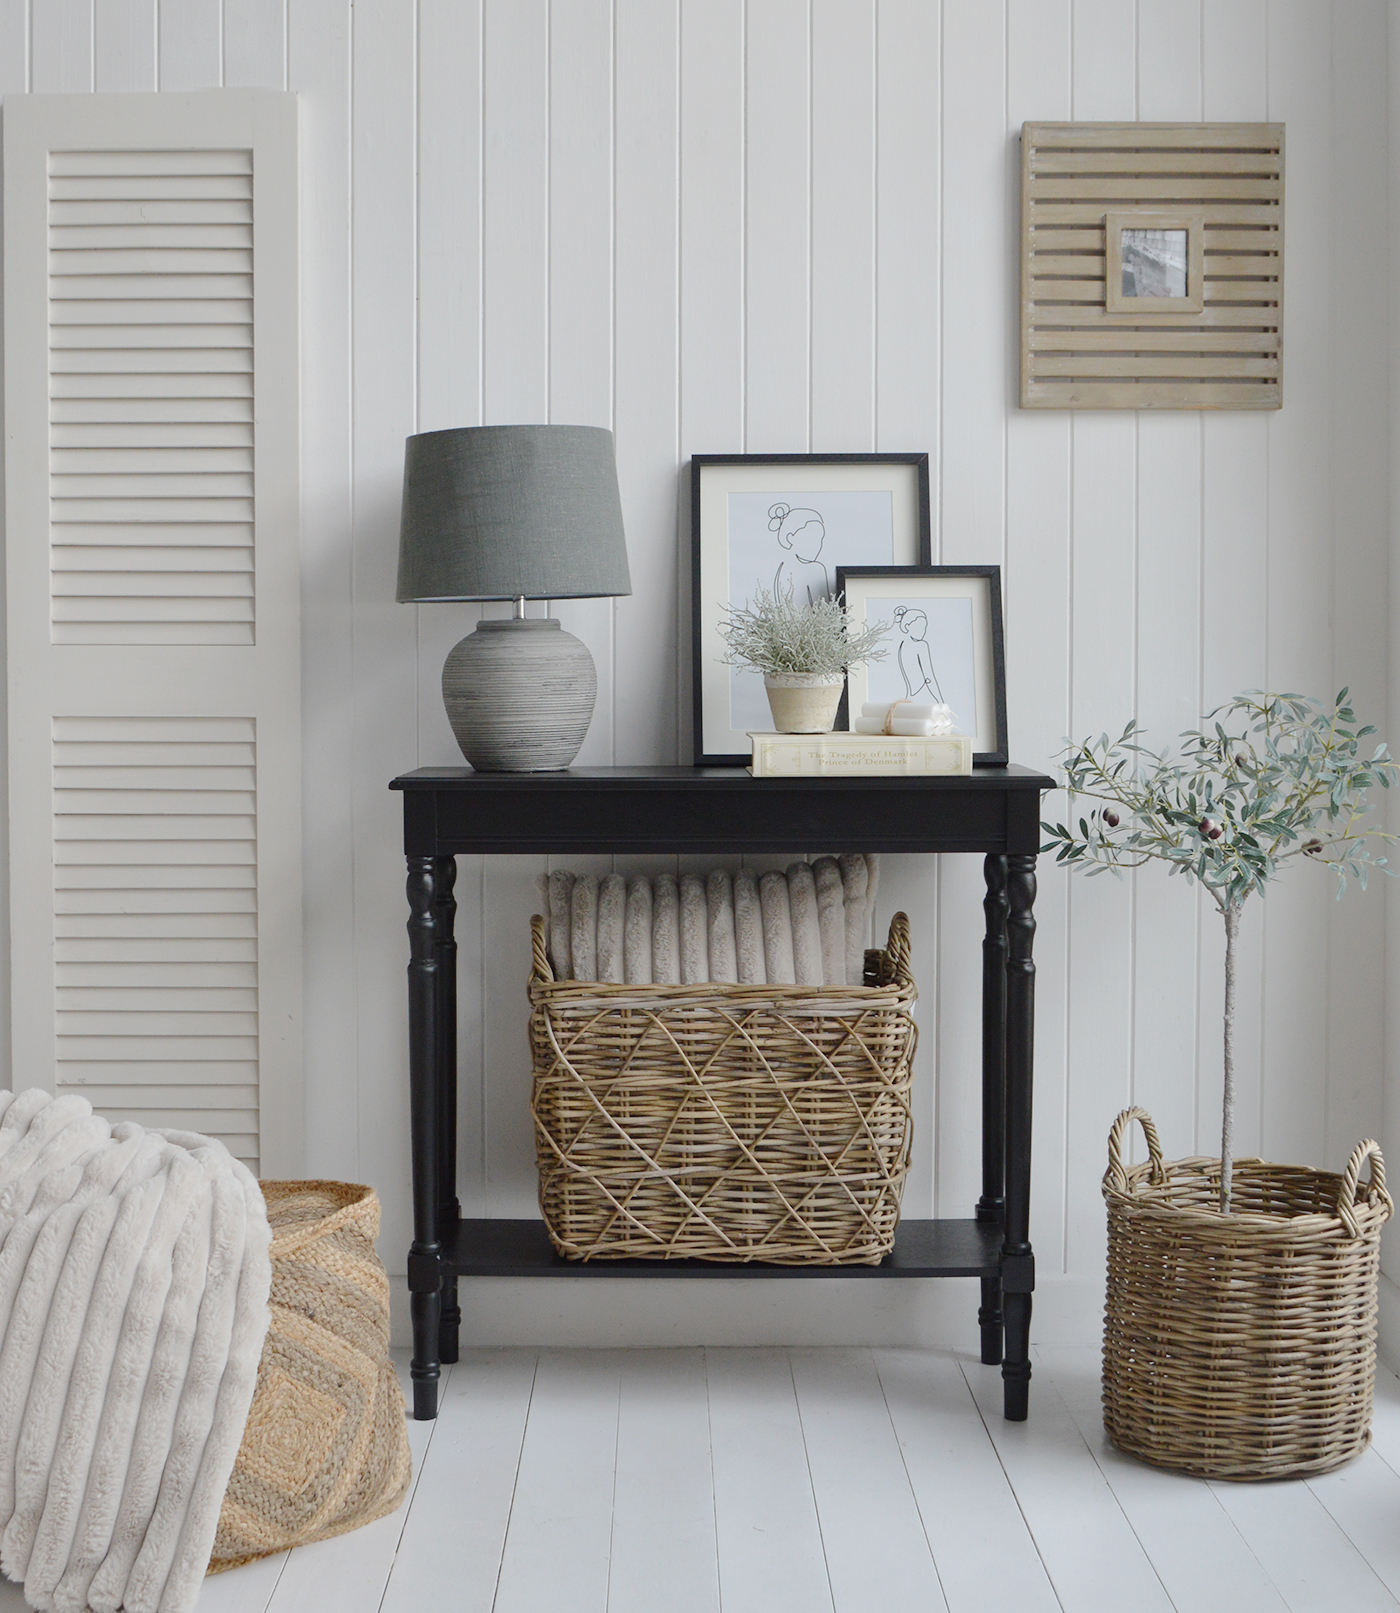 Ashby black console hall table with a shelf for an elegant Hamptons Beach House interior in your hall entry way